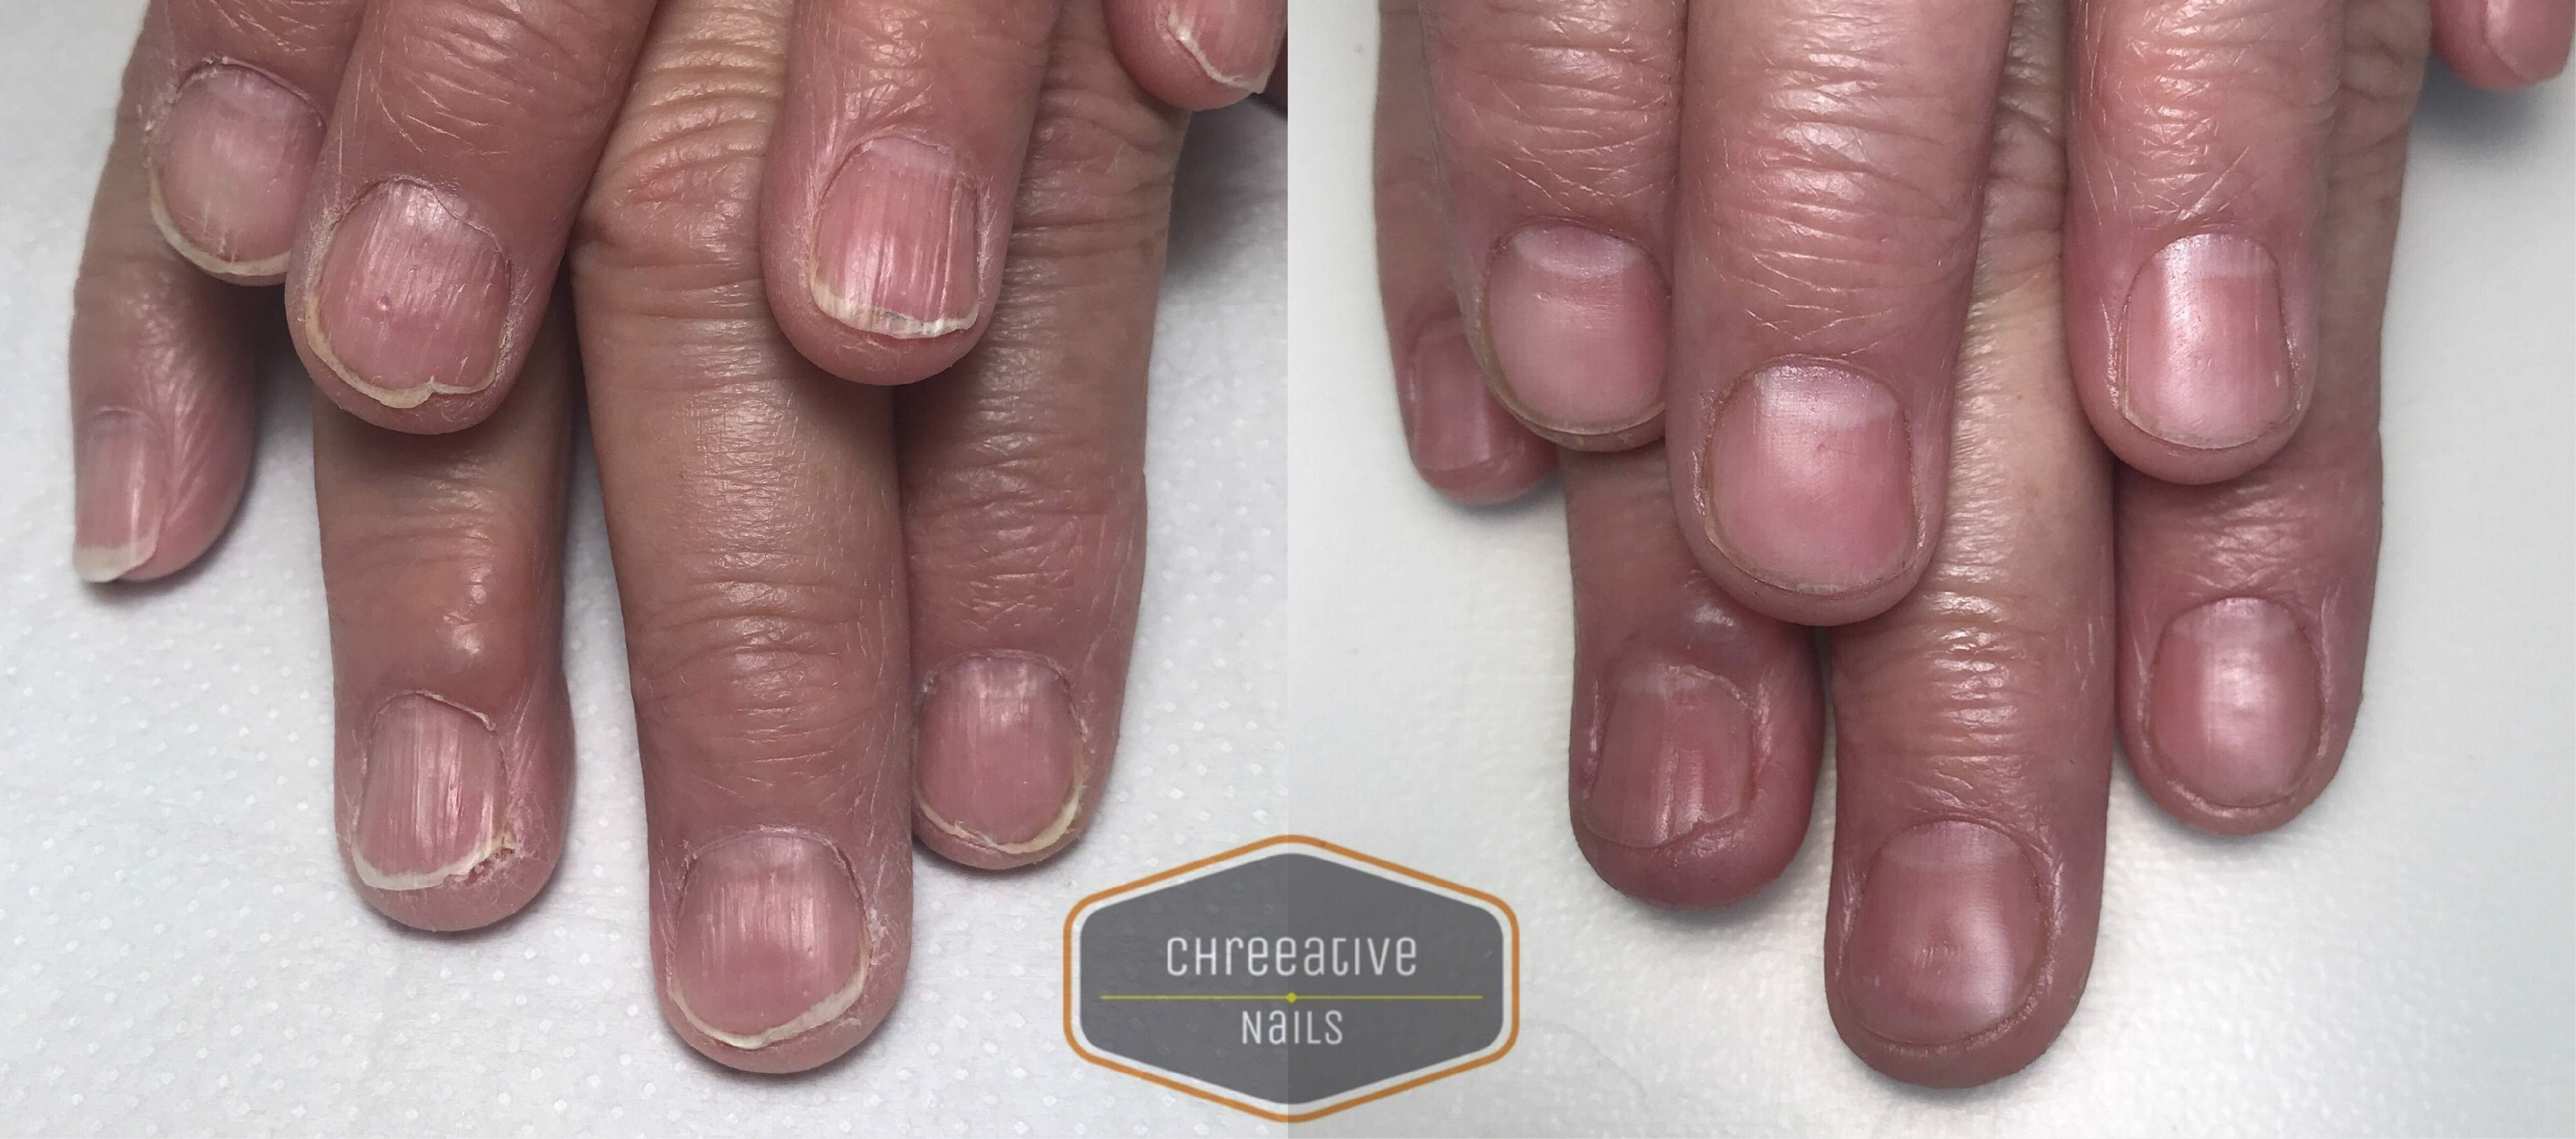 This particular client suffers from severe ridging, splitting and peeling of the nails.